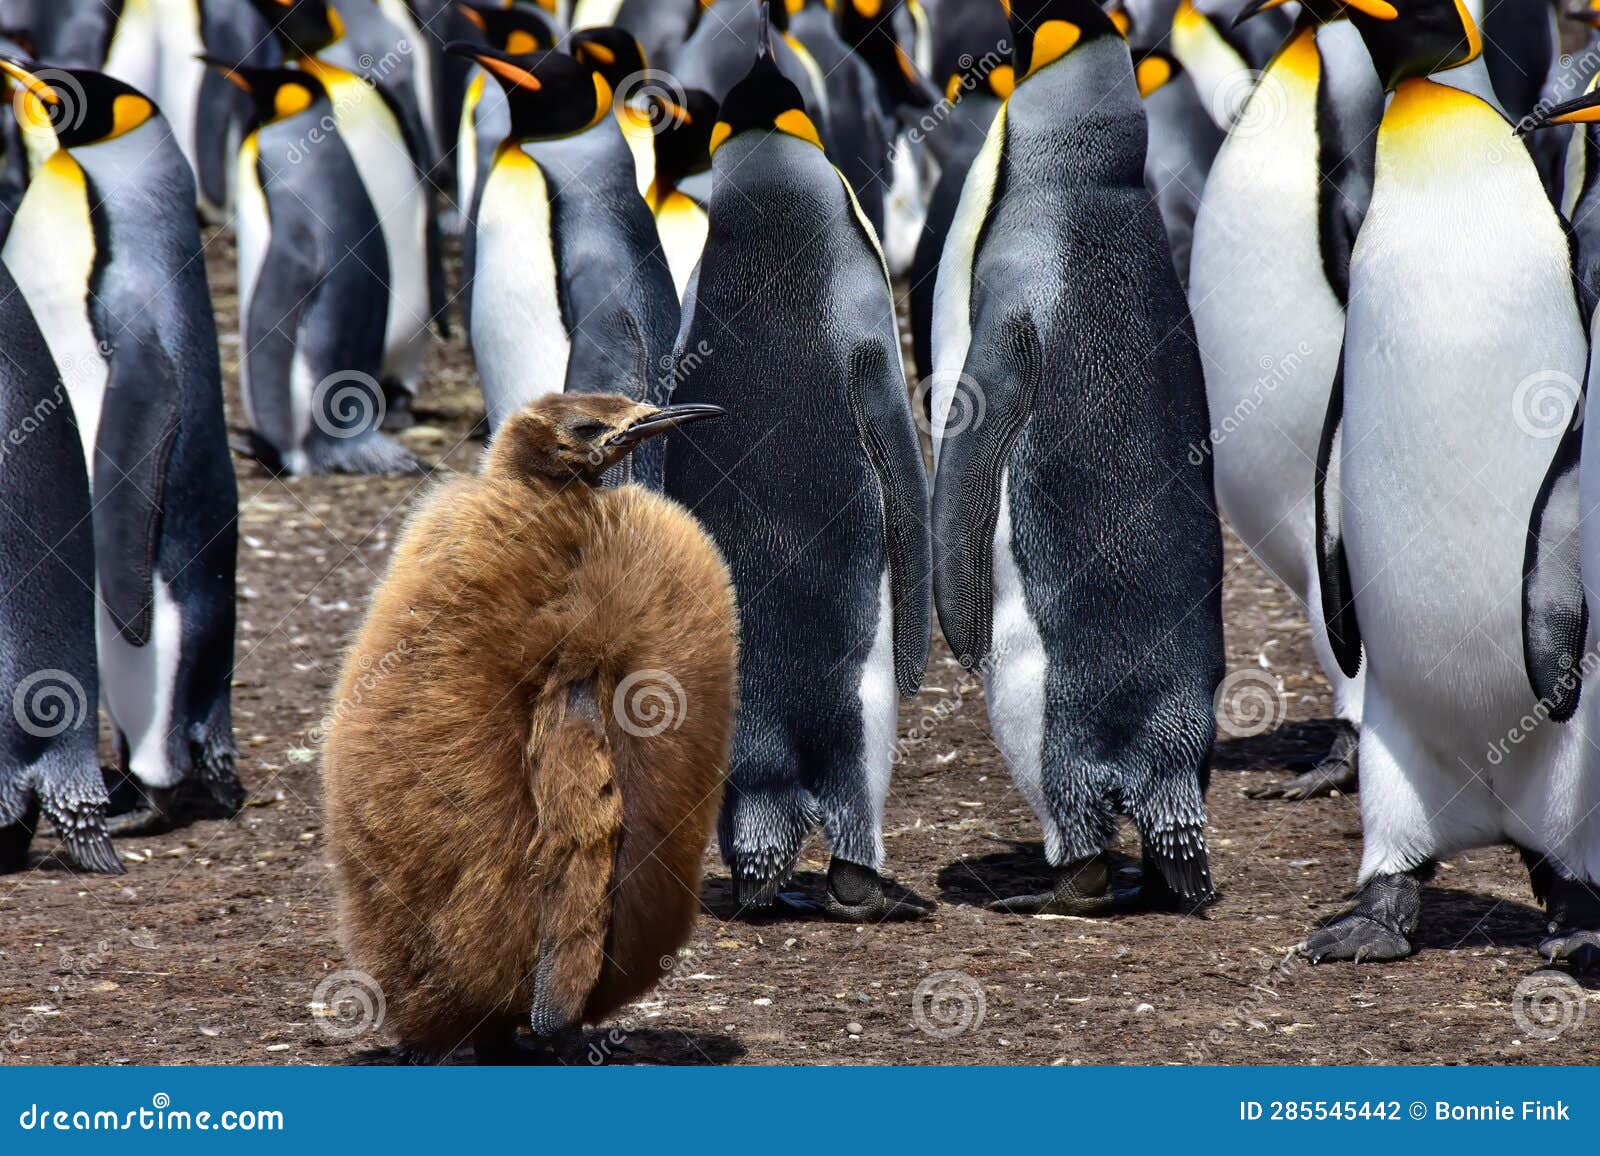 Fluffy Penguin Chick in a Colony of King Penguins Stock Photo - Image ...